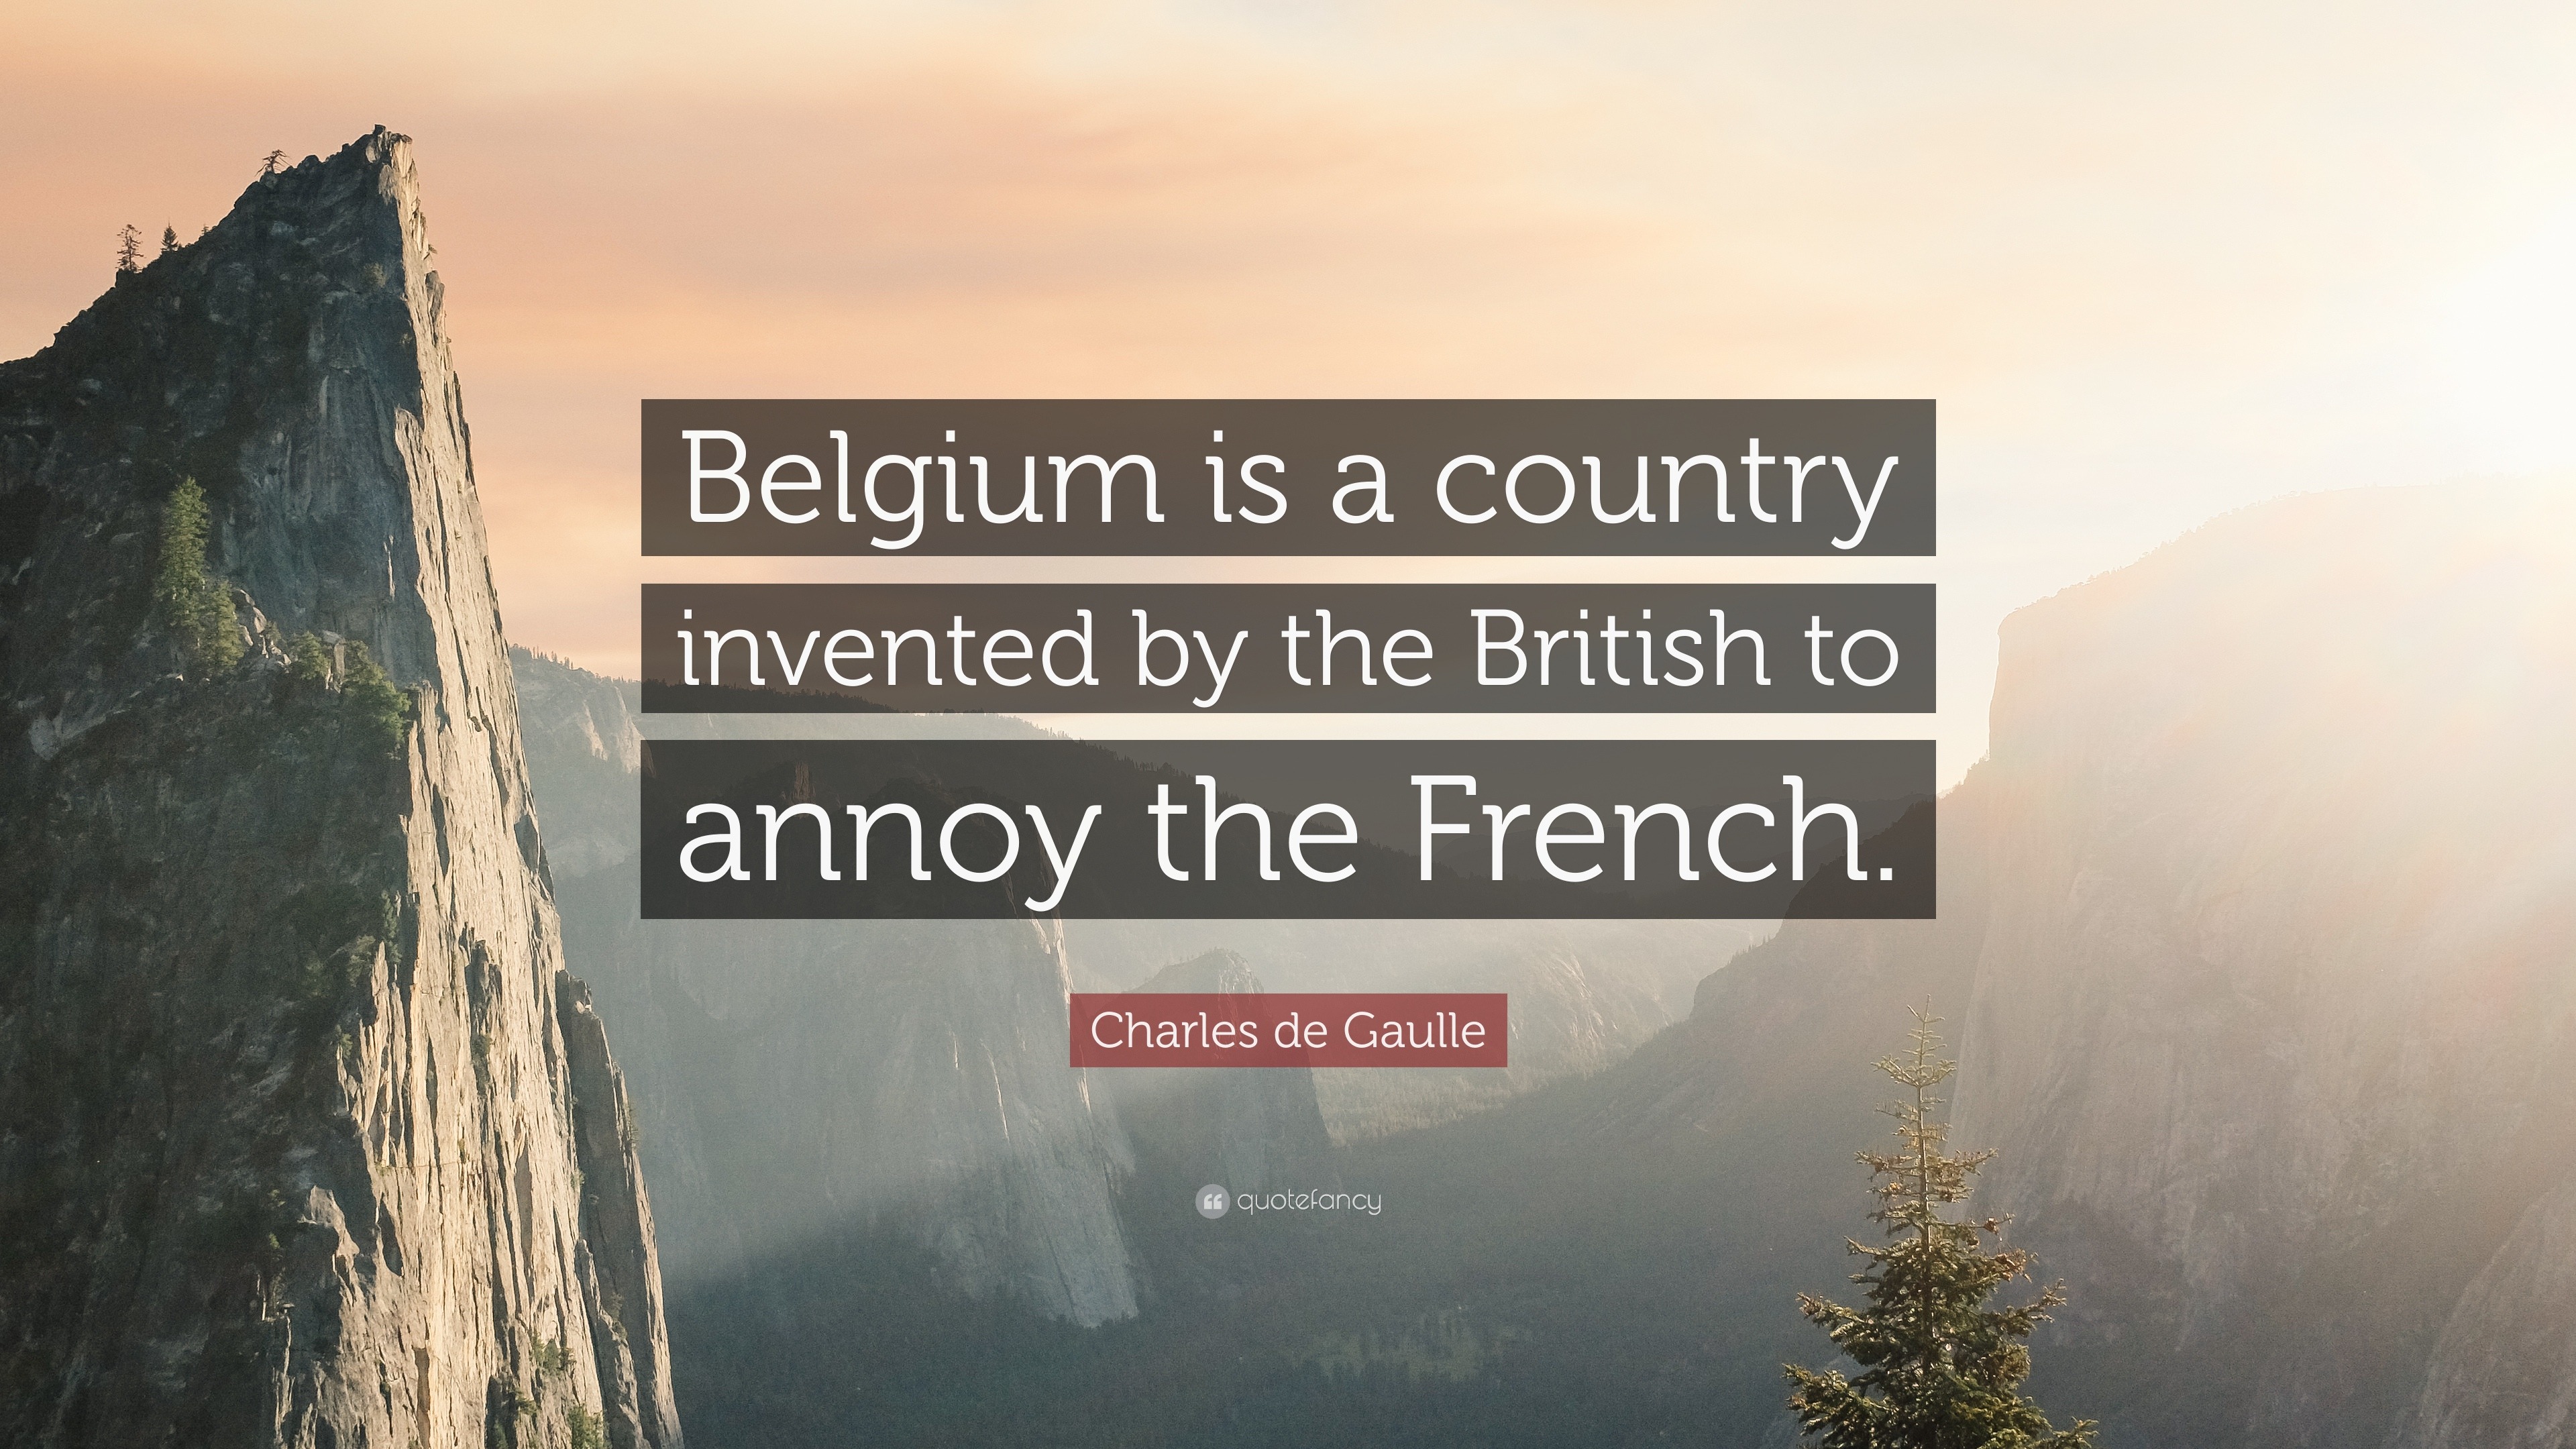 636583-Charles-de-Gaulle-Quote-Belgium-is-a-country-invented-by-the.jpg